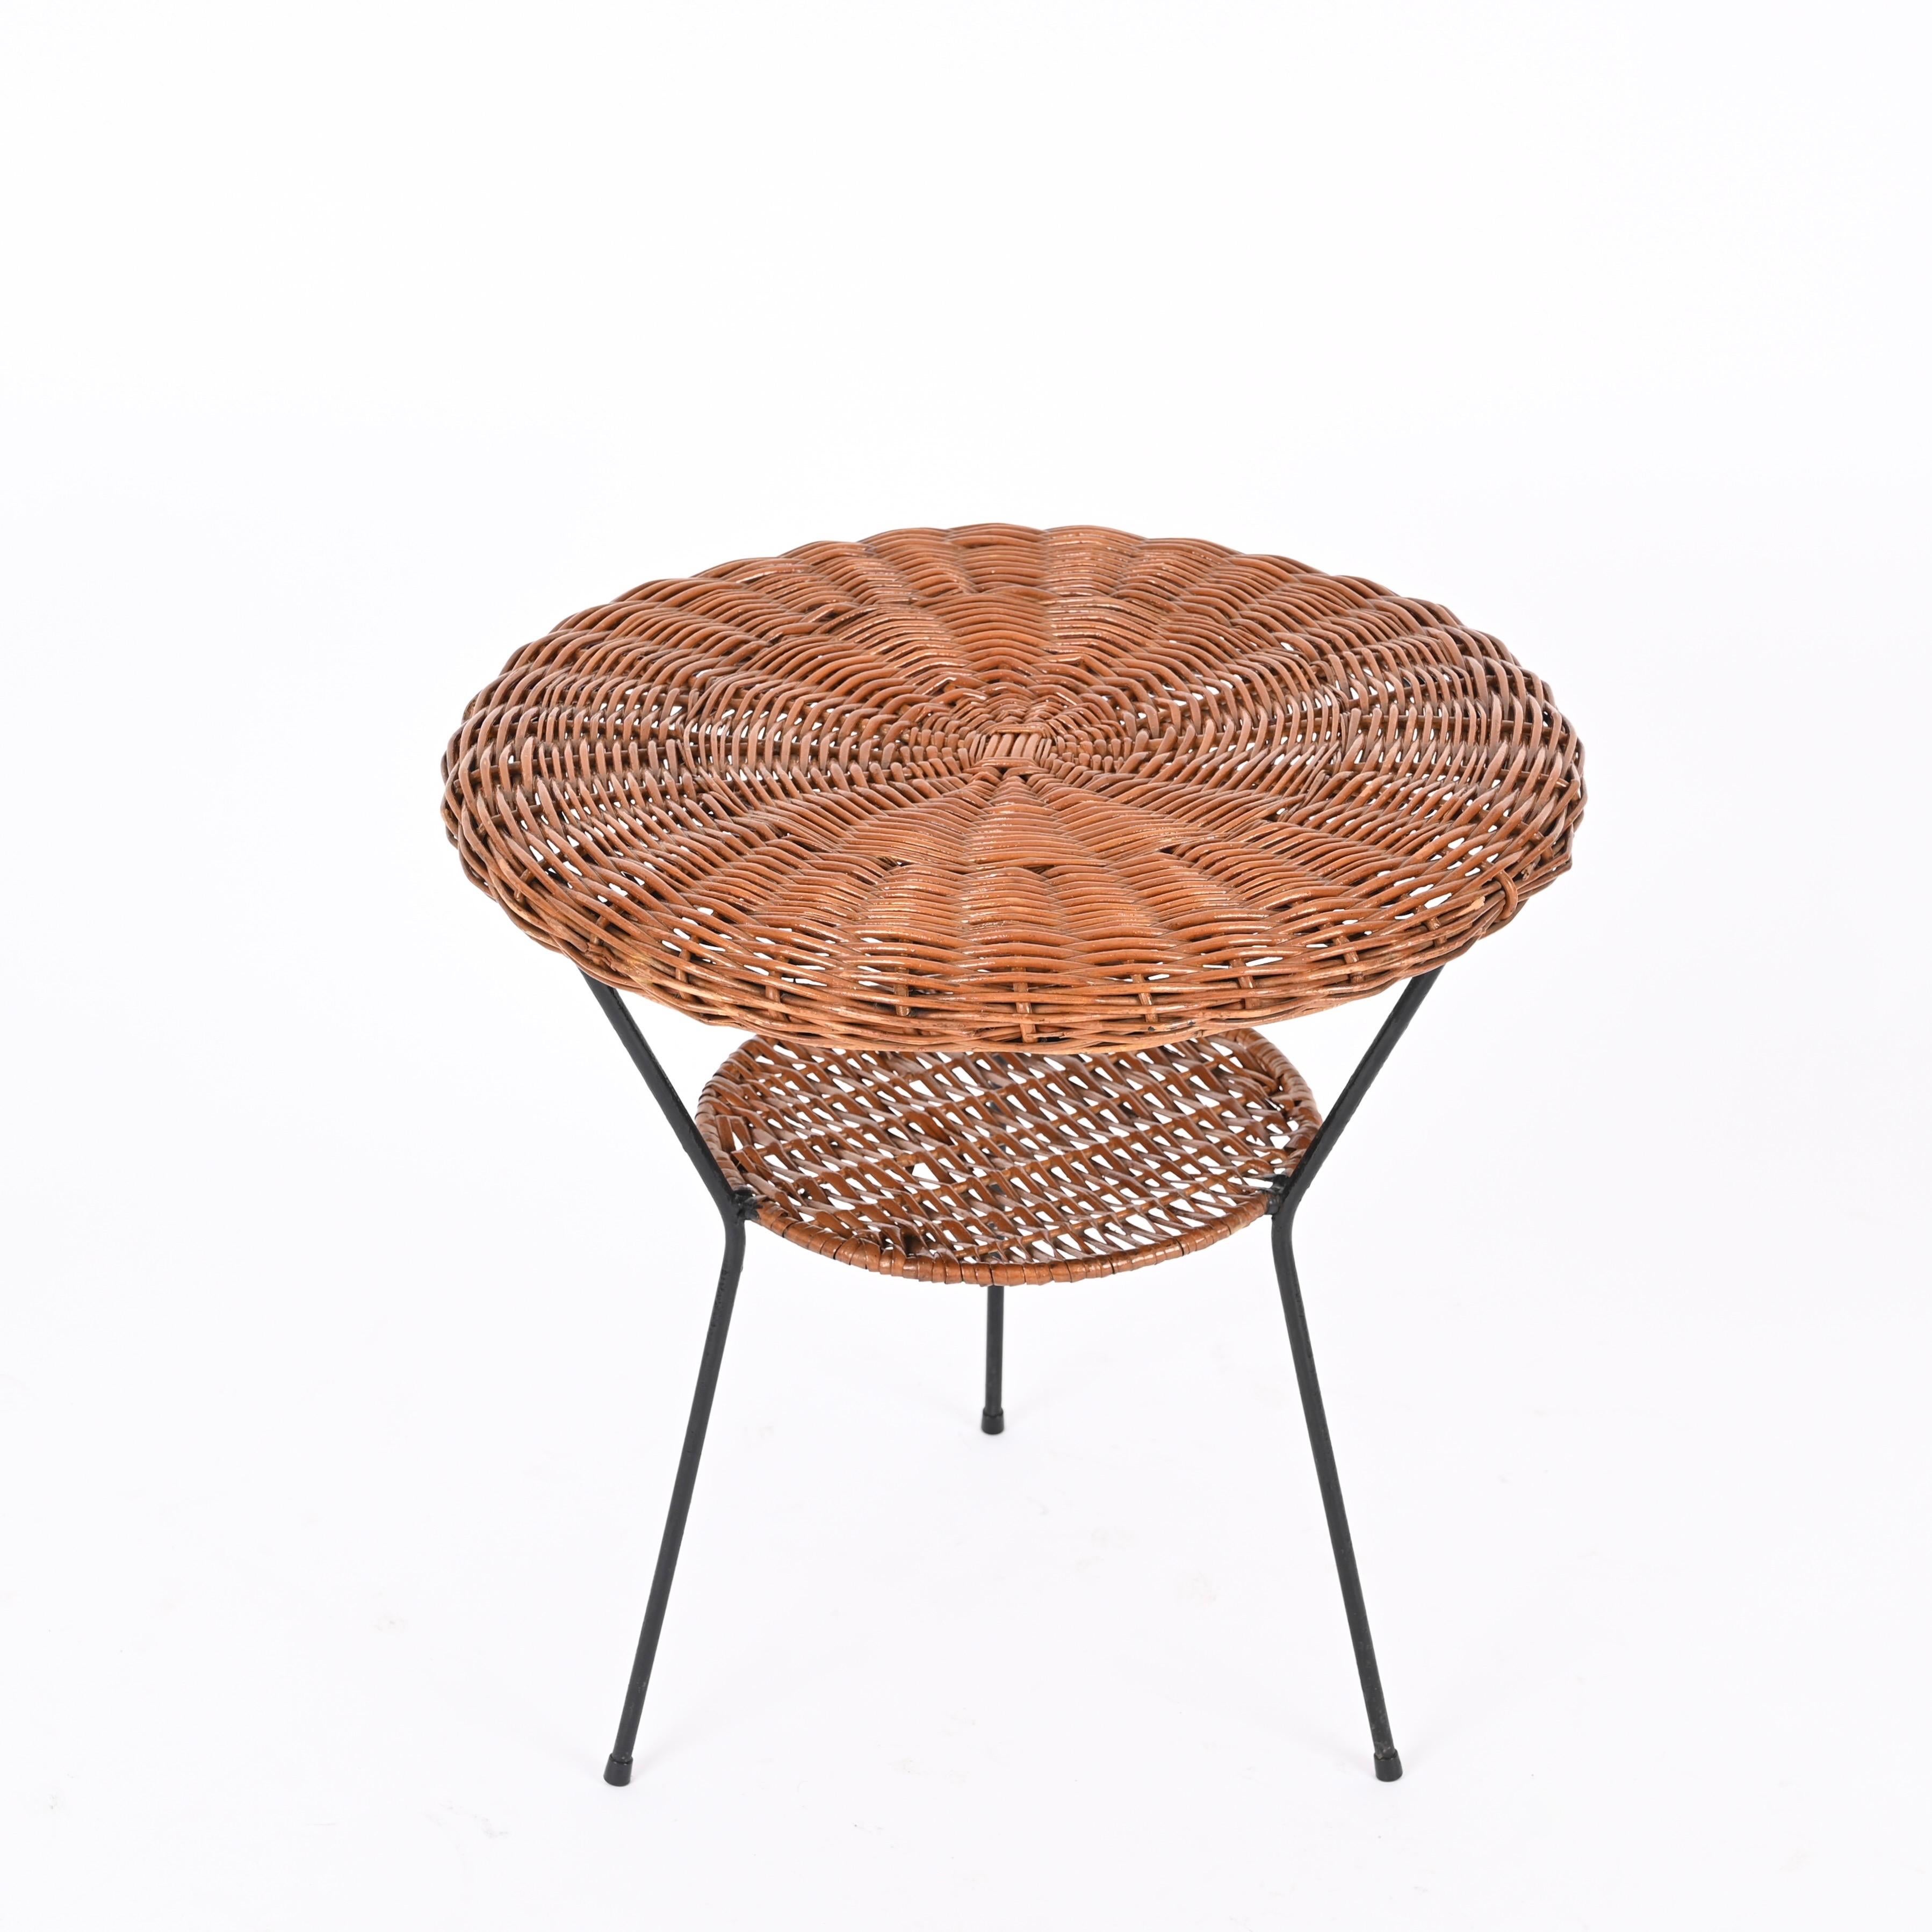 French Woven Rattan, Wicker and Iron Two-Tier Round Coffee Table, Matégot, France 1960s For Sale